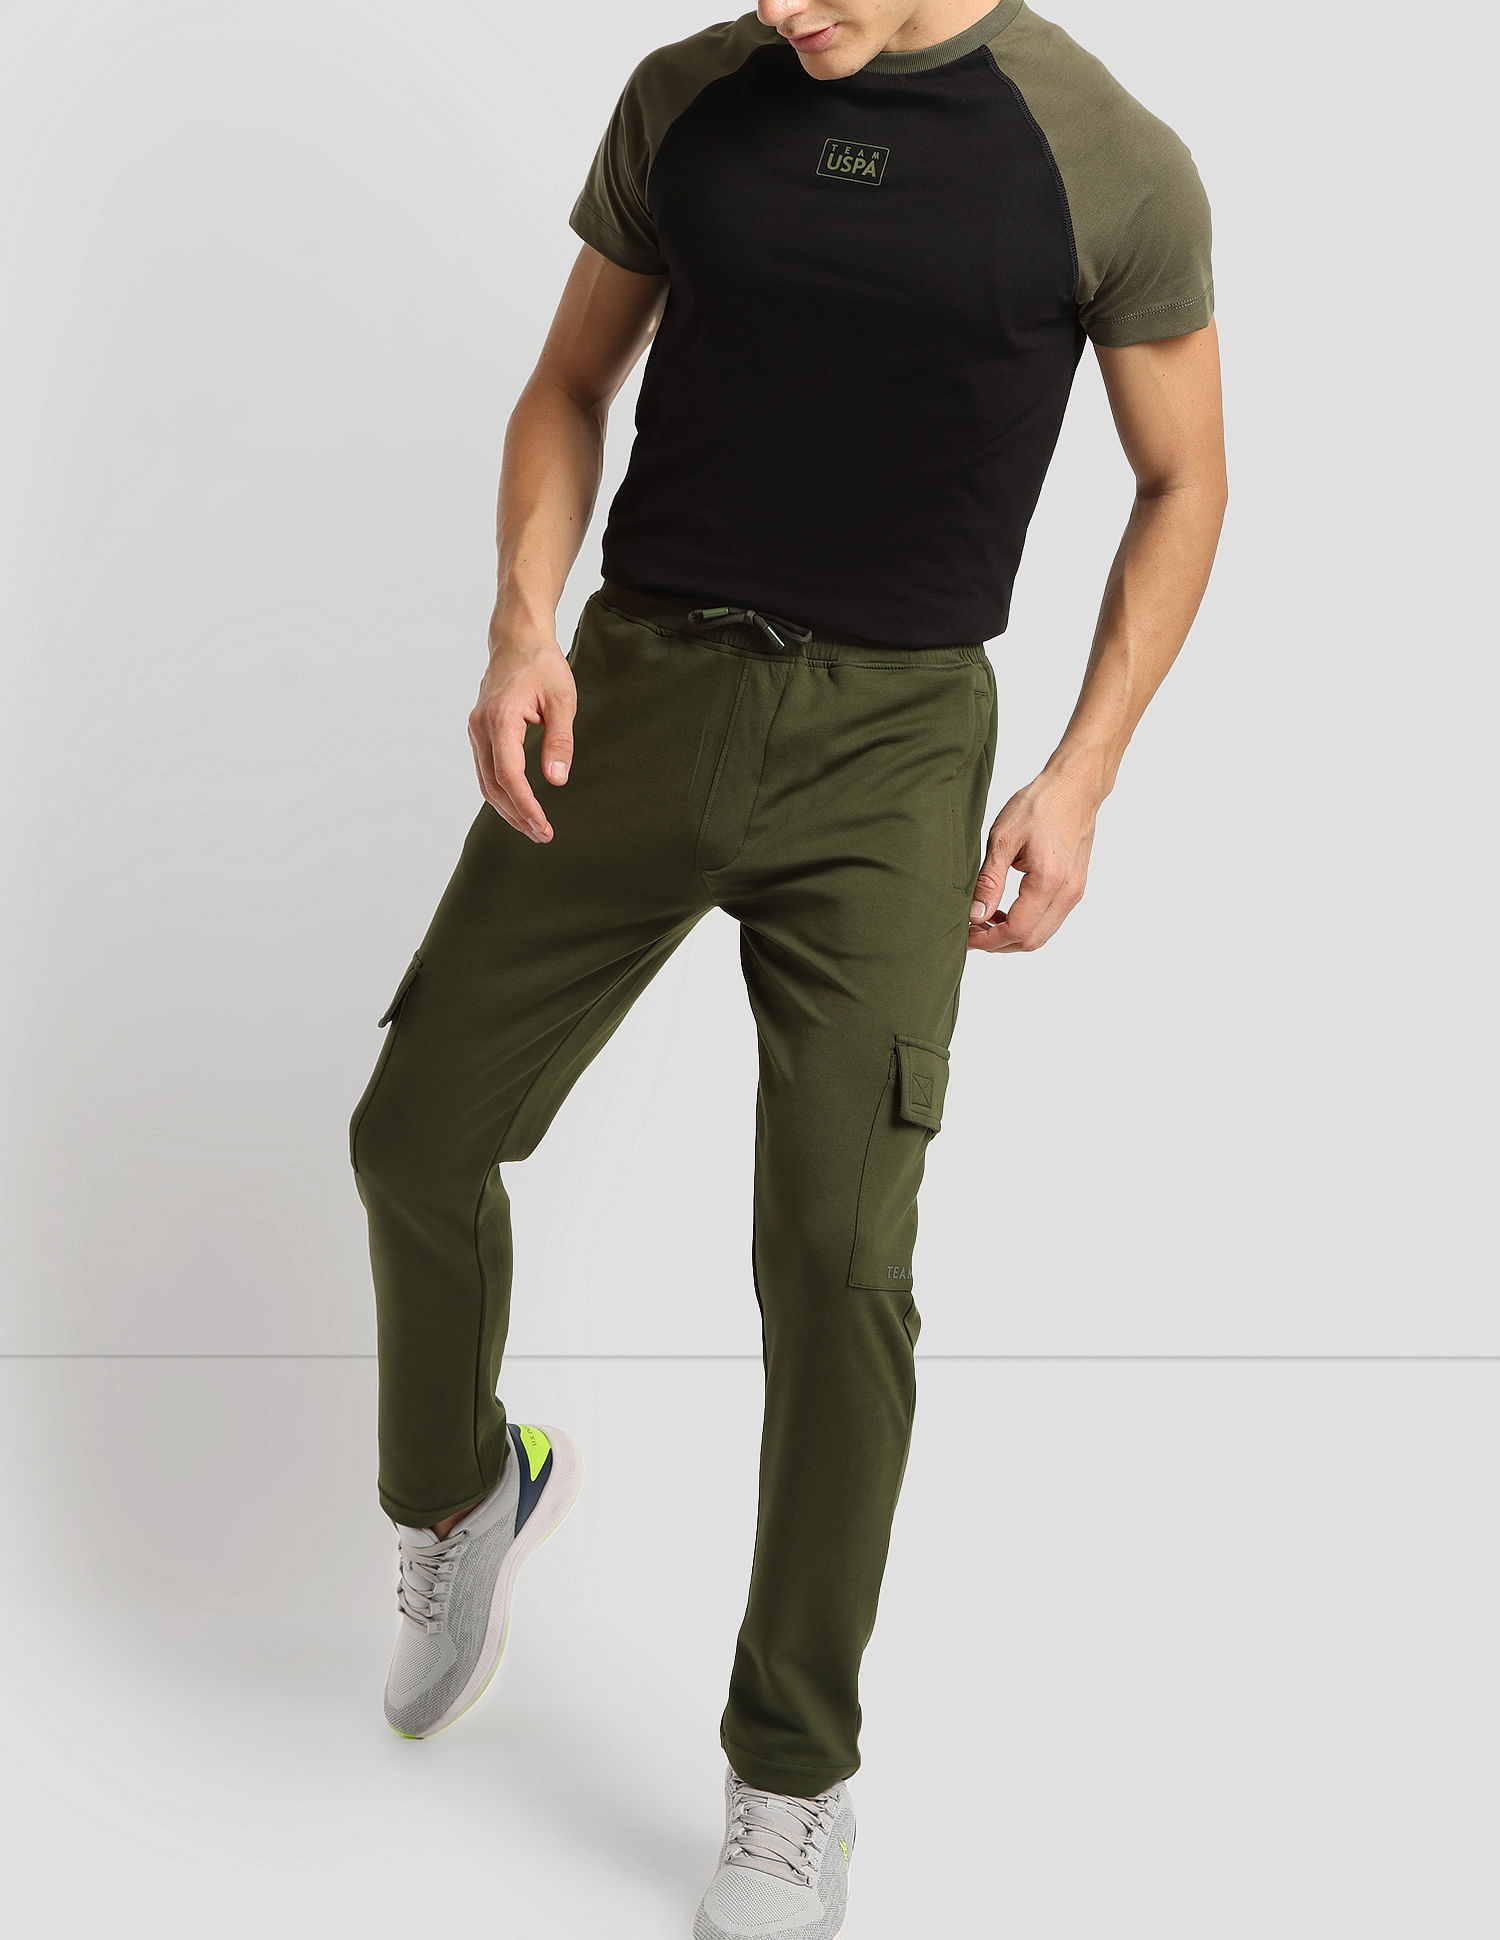 Buy CARGO TRACK PANTS FOR DAILY ROUTINE, TRAVELLING, AND ADVENTURE  ACTIVITIES. - Lowest price in India| GlowRoad